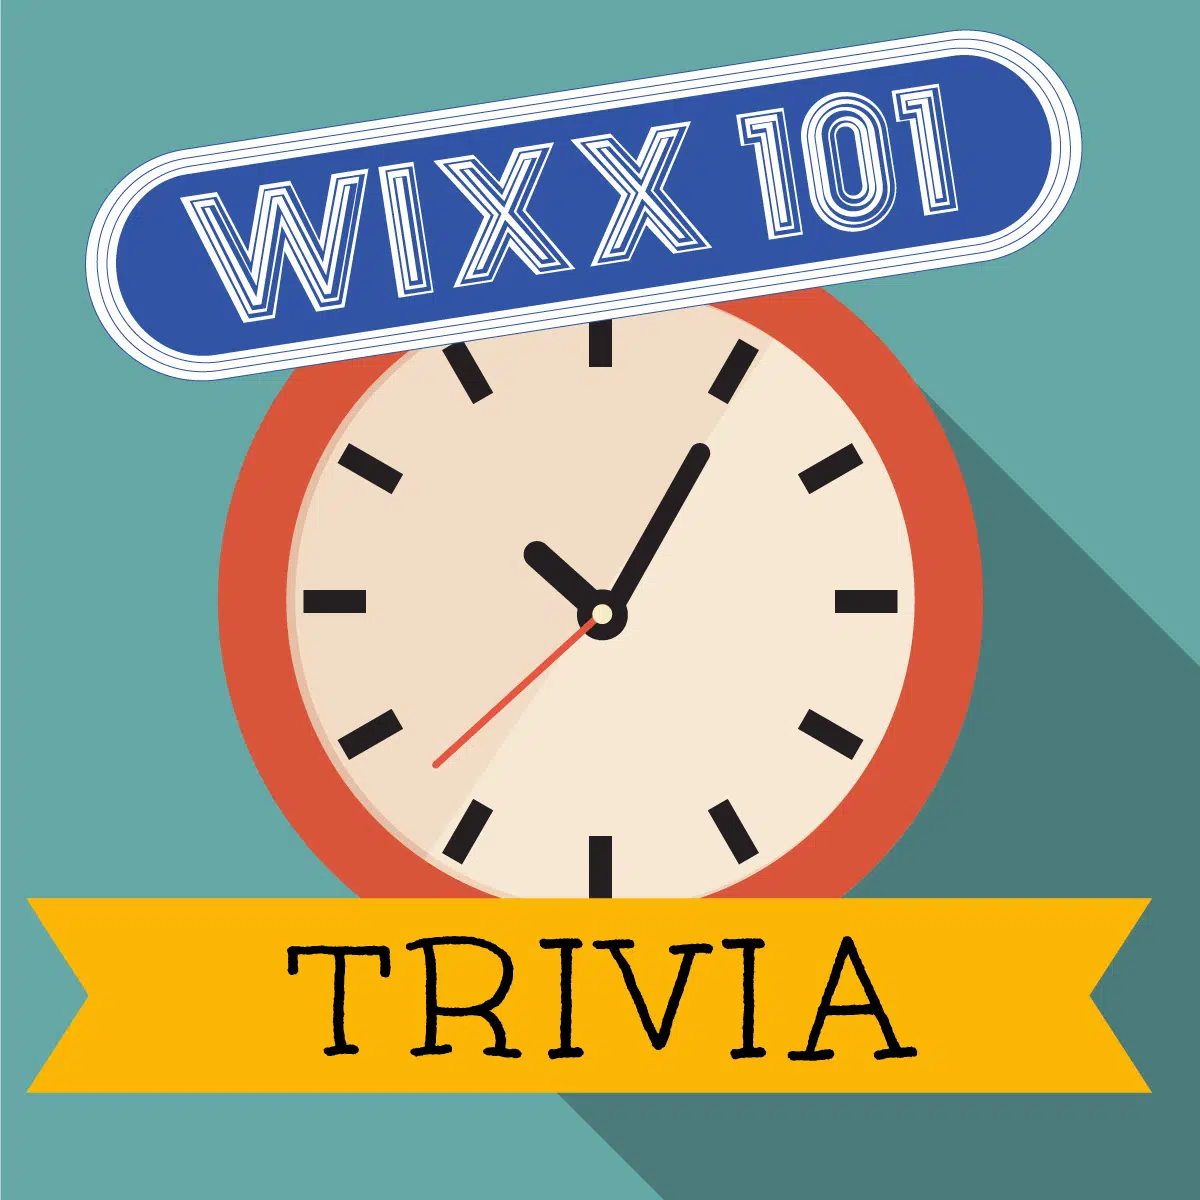 10 O Clock Trivia Answers January 2021 101 Wixx Your Hit Music Station